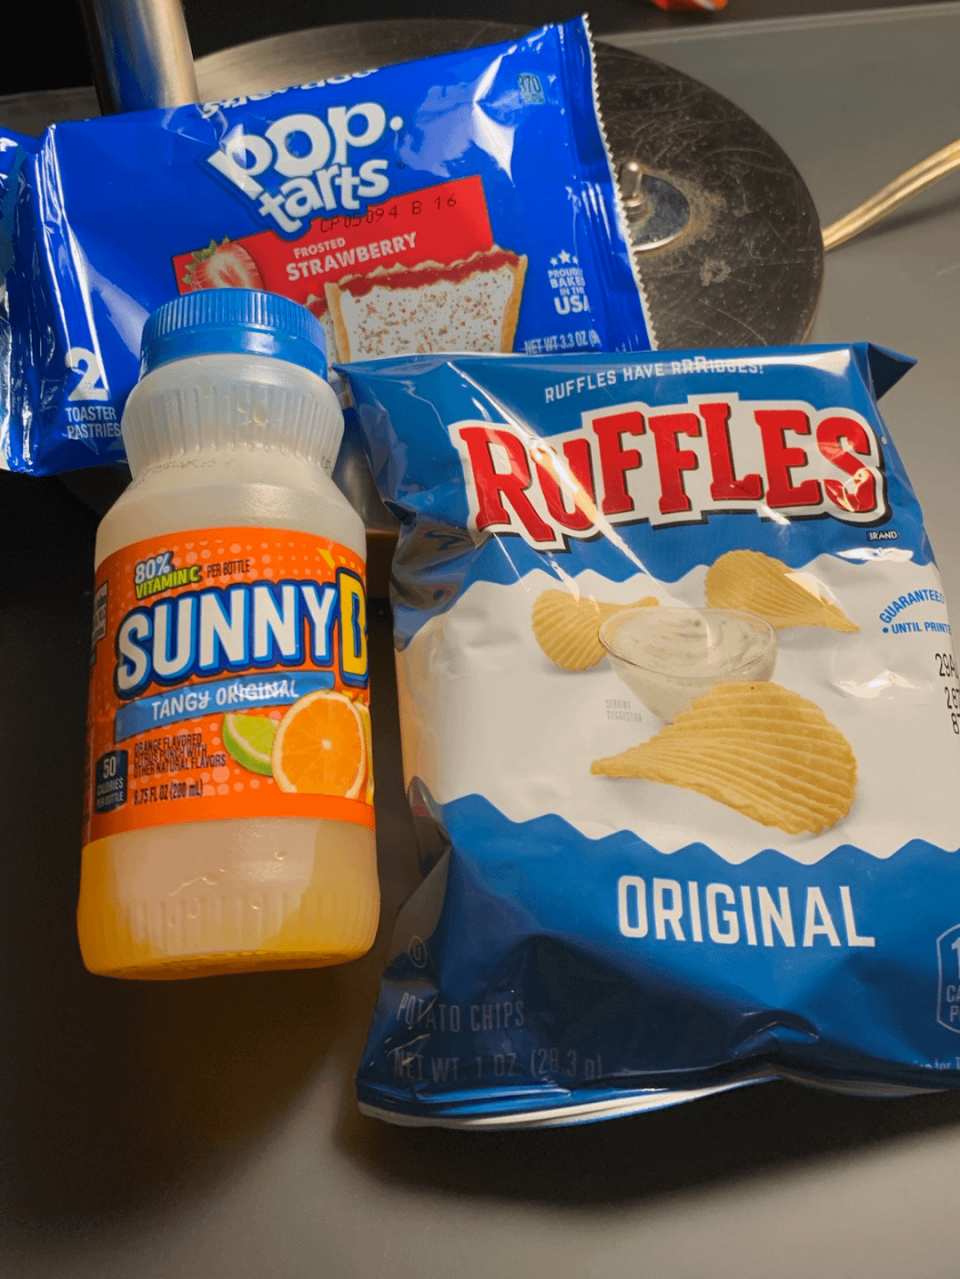 A bottle of SunnyD, a pack of strawberry Pop-Tarts, and a bag of original Ruffles chips on a desk